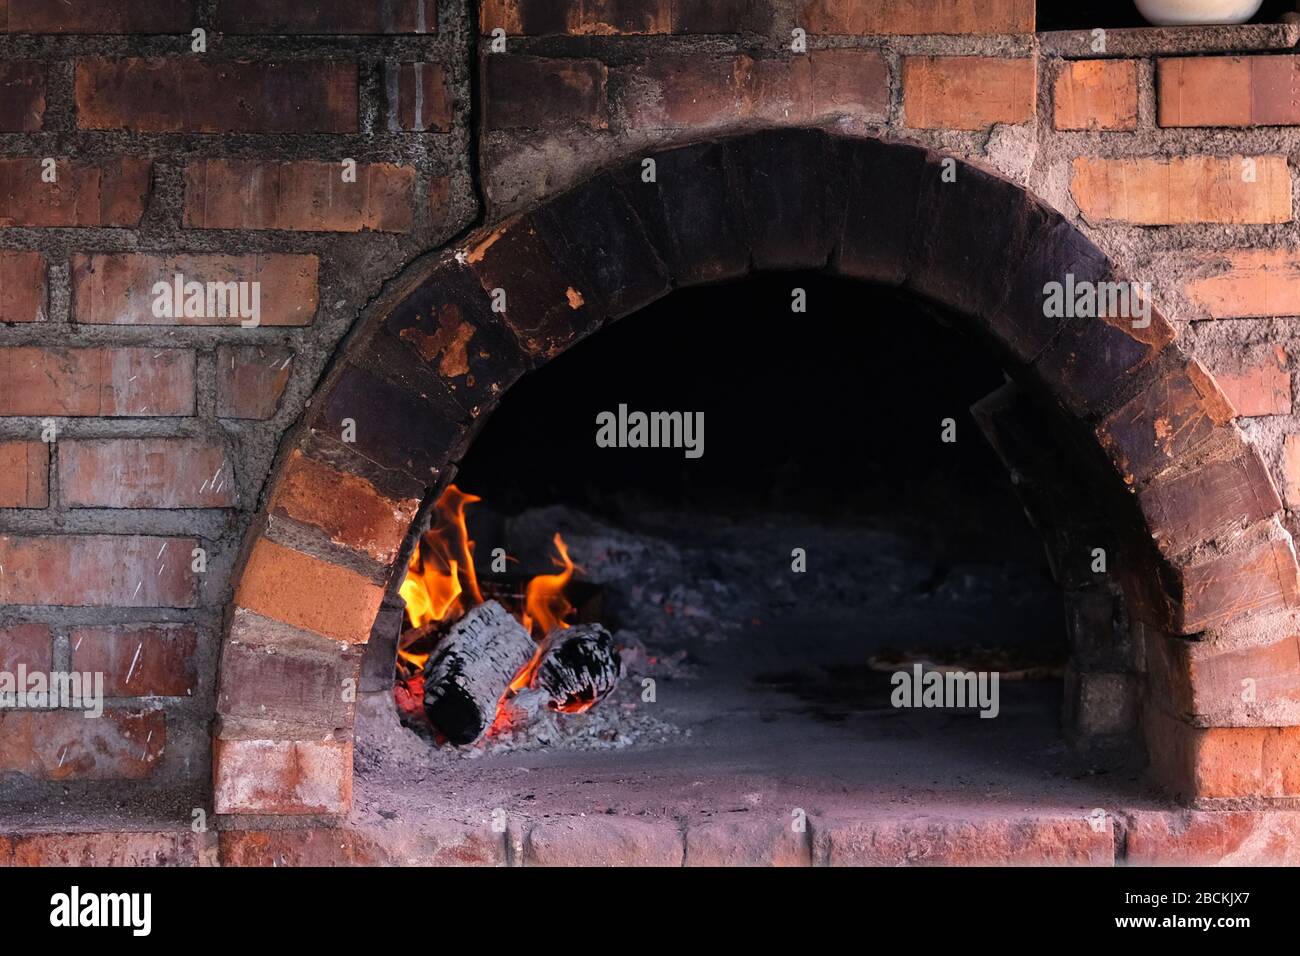 Fire burns in old traditional brick stone furnace for cooking. Cooking in a wood-fired oven. Stock Photo